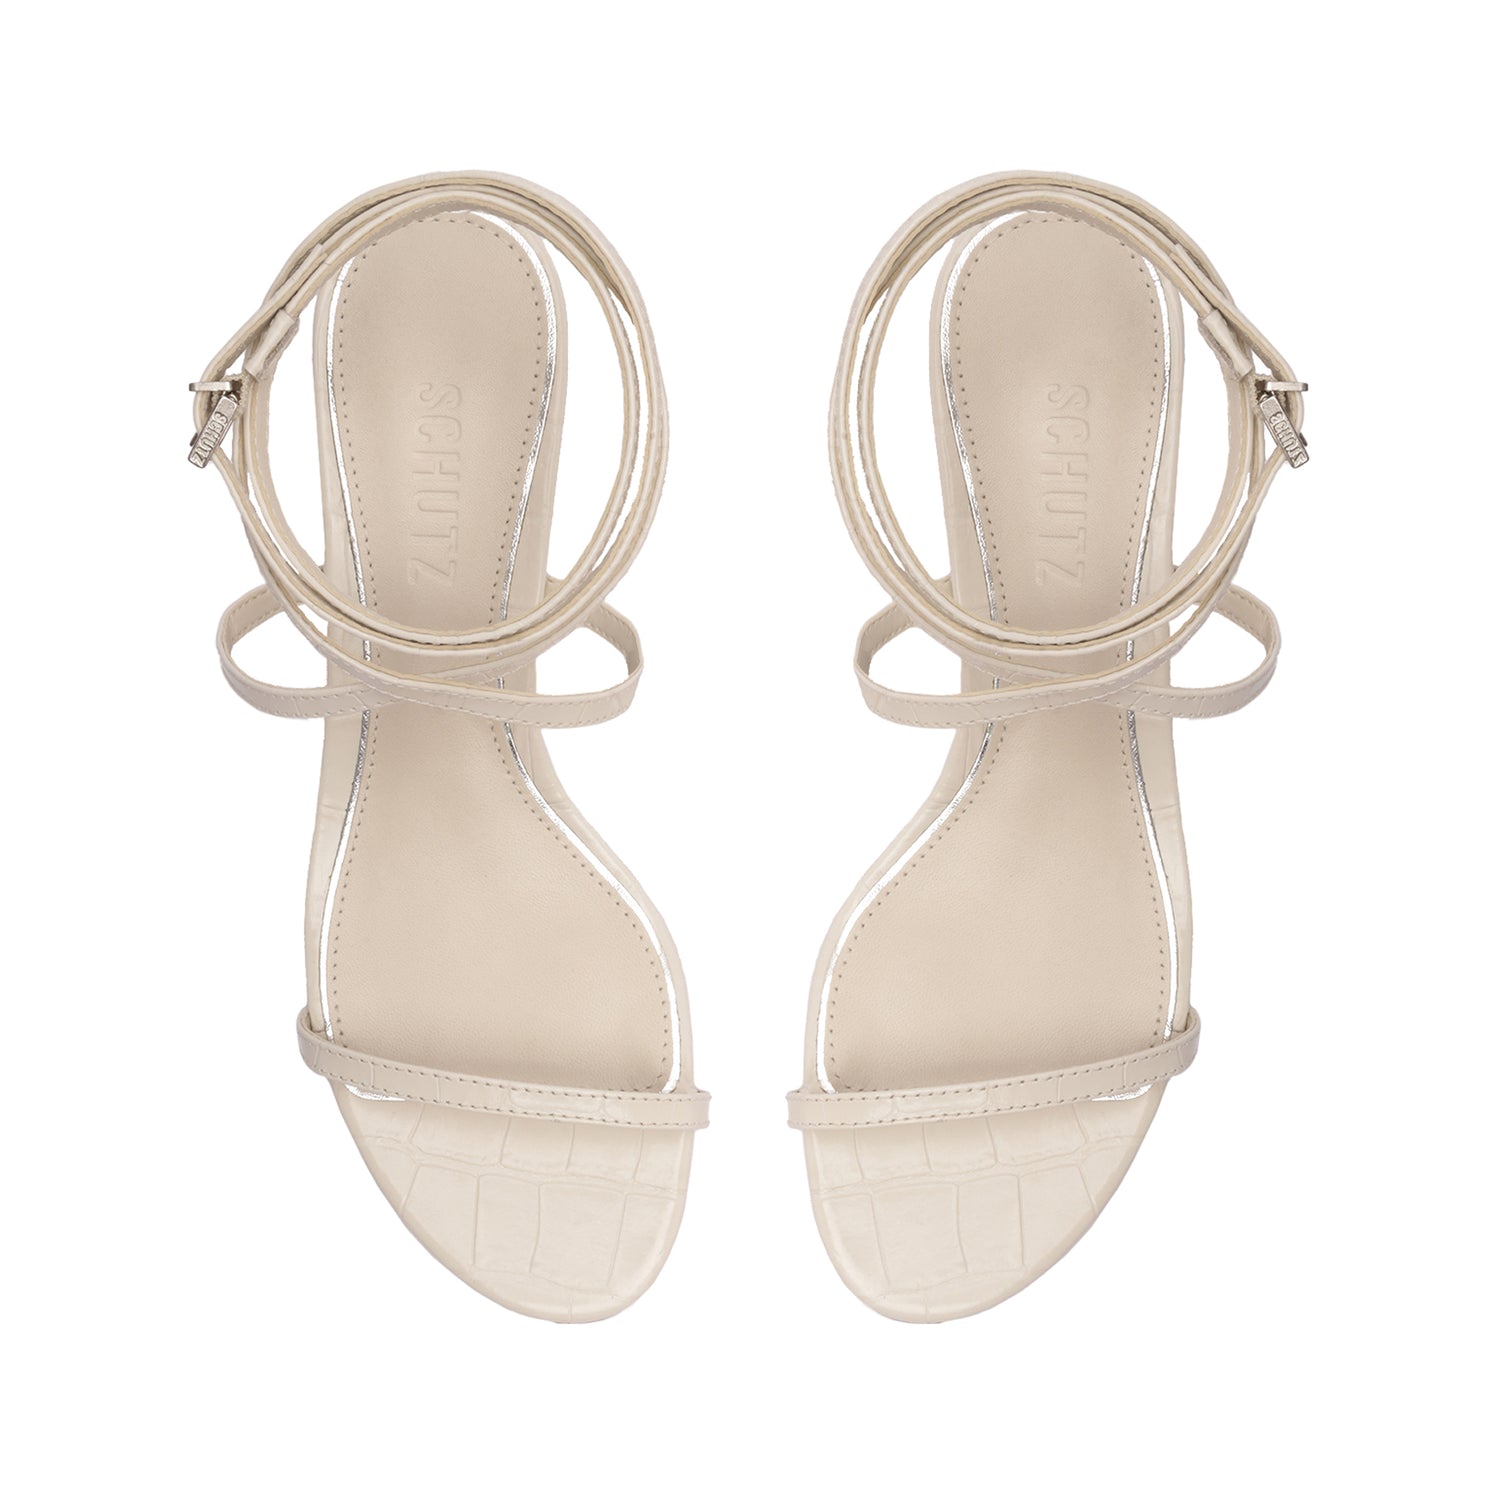 Sherry Leather Sandal Sandals FALL 23    - Schutz Shoes